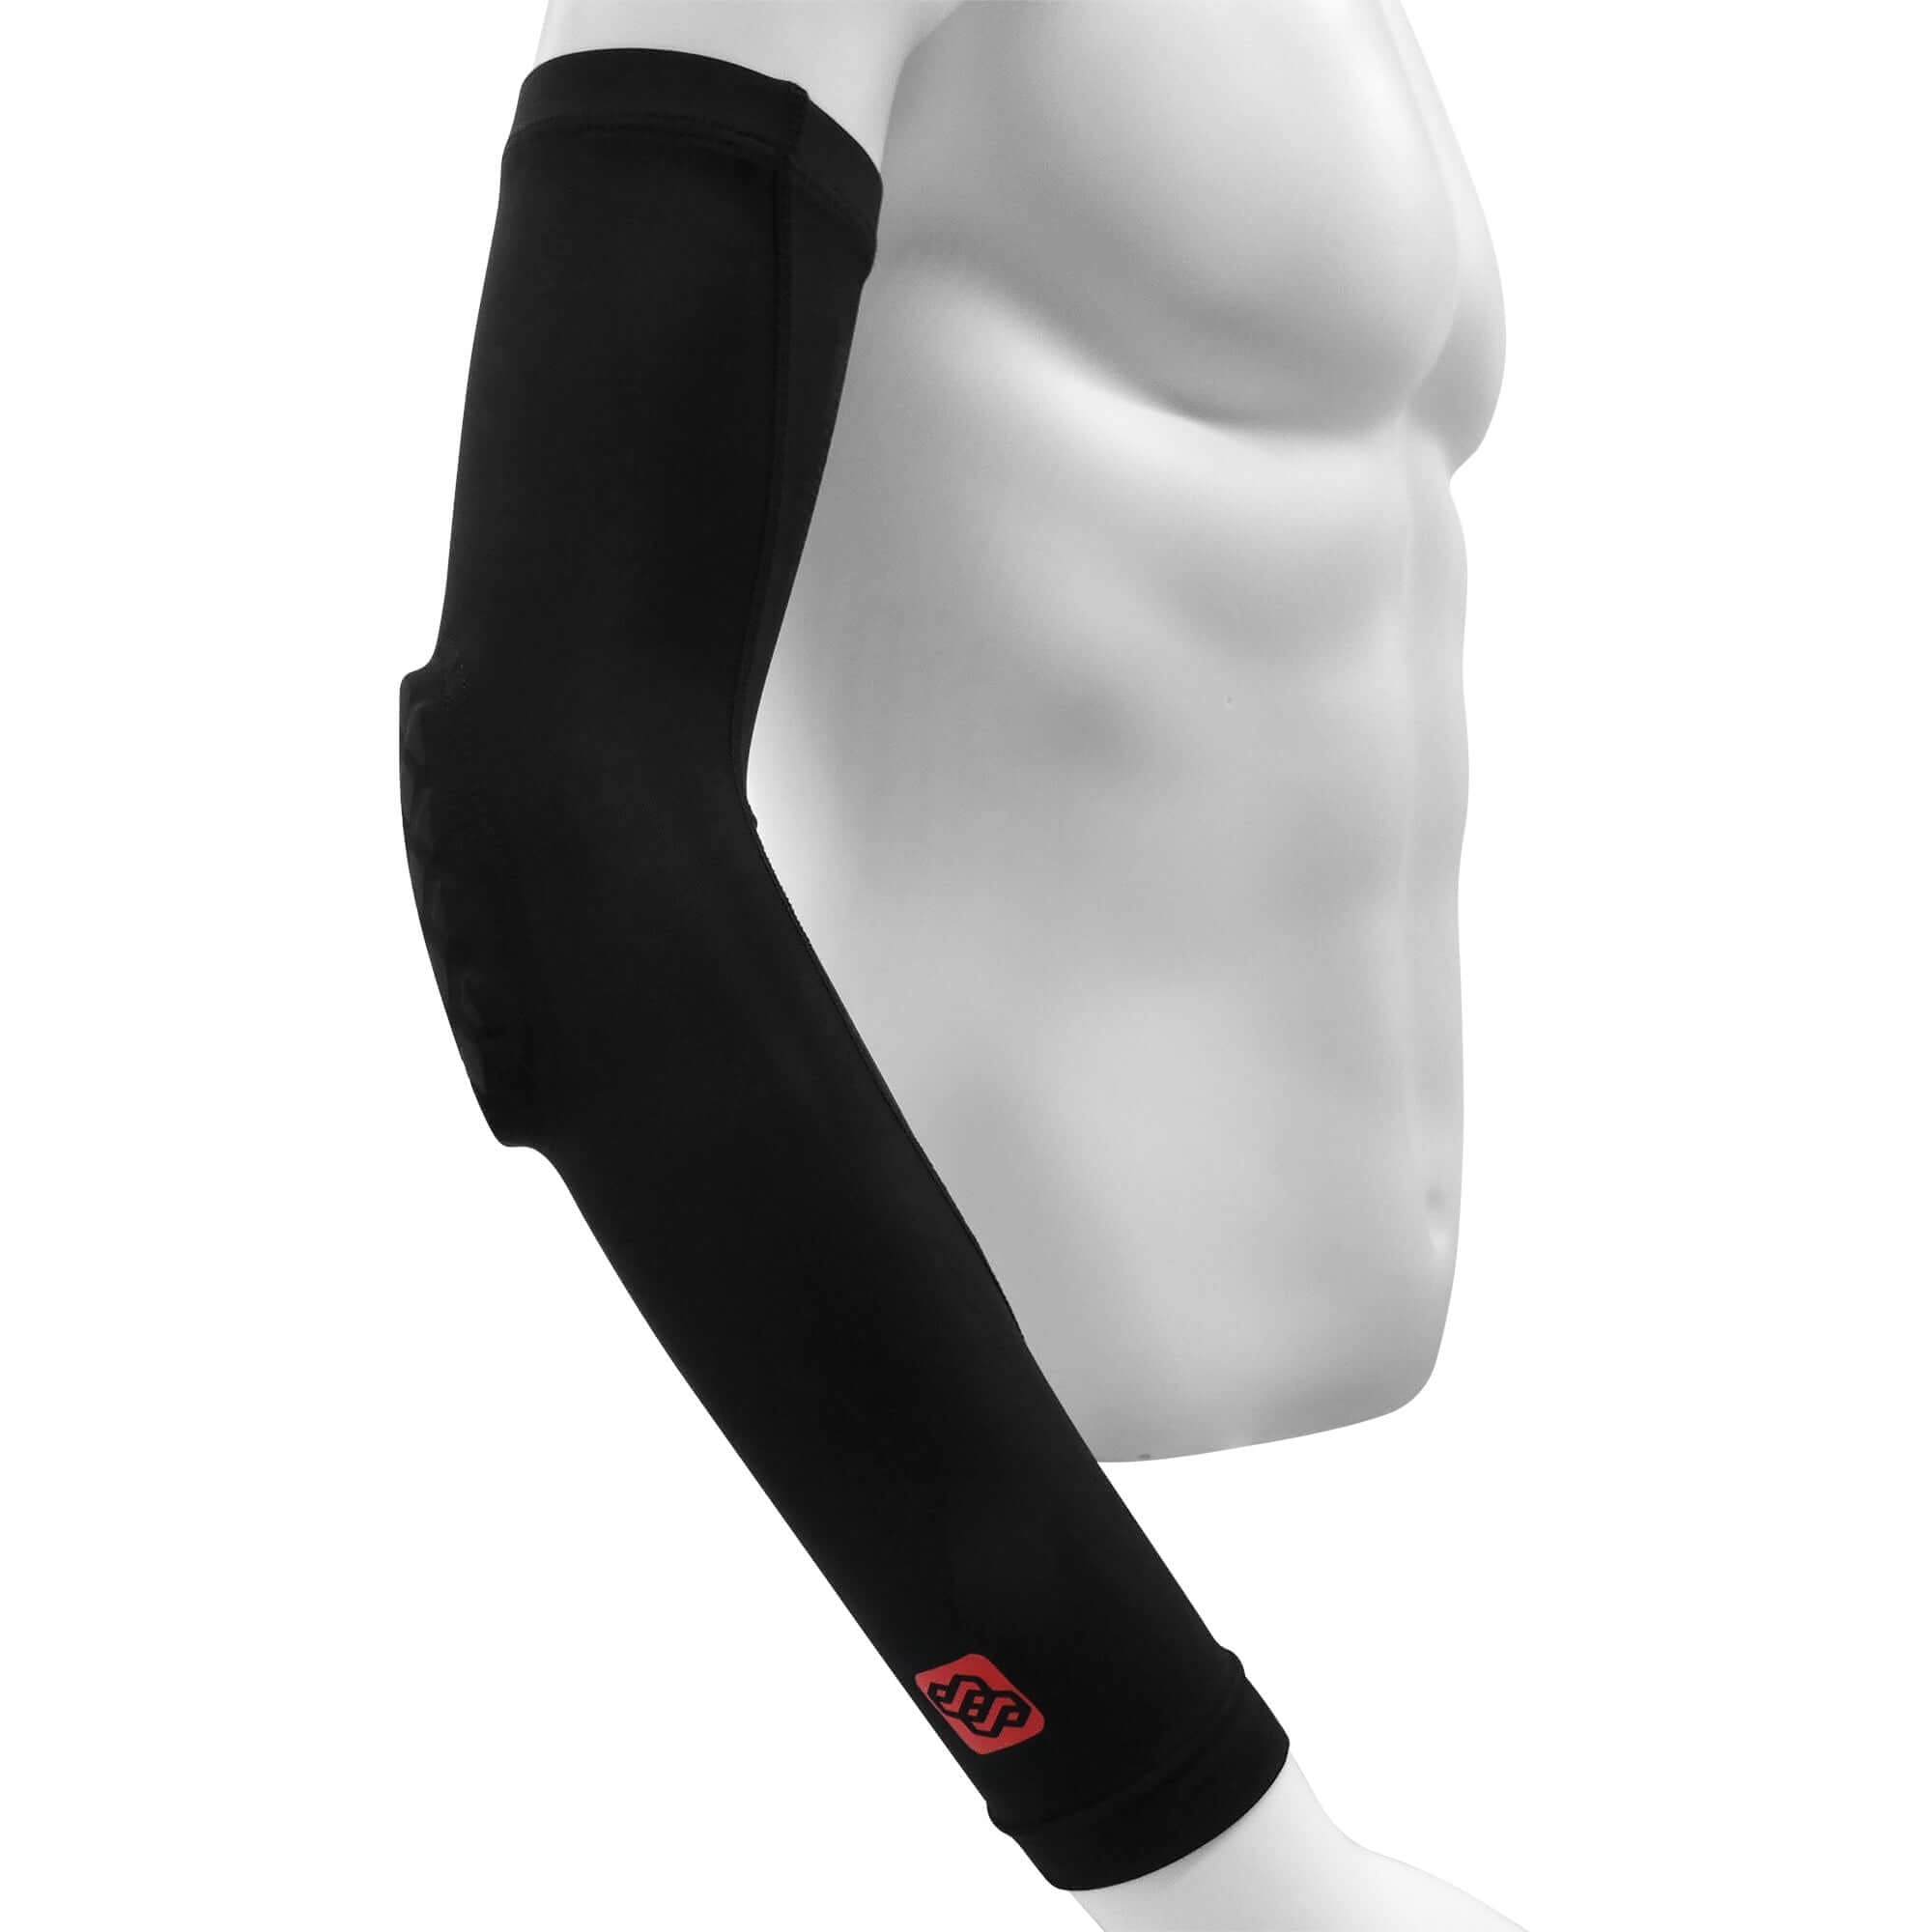 Extended Elbow Compression Sleeve with Cushioning - KEFLUK